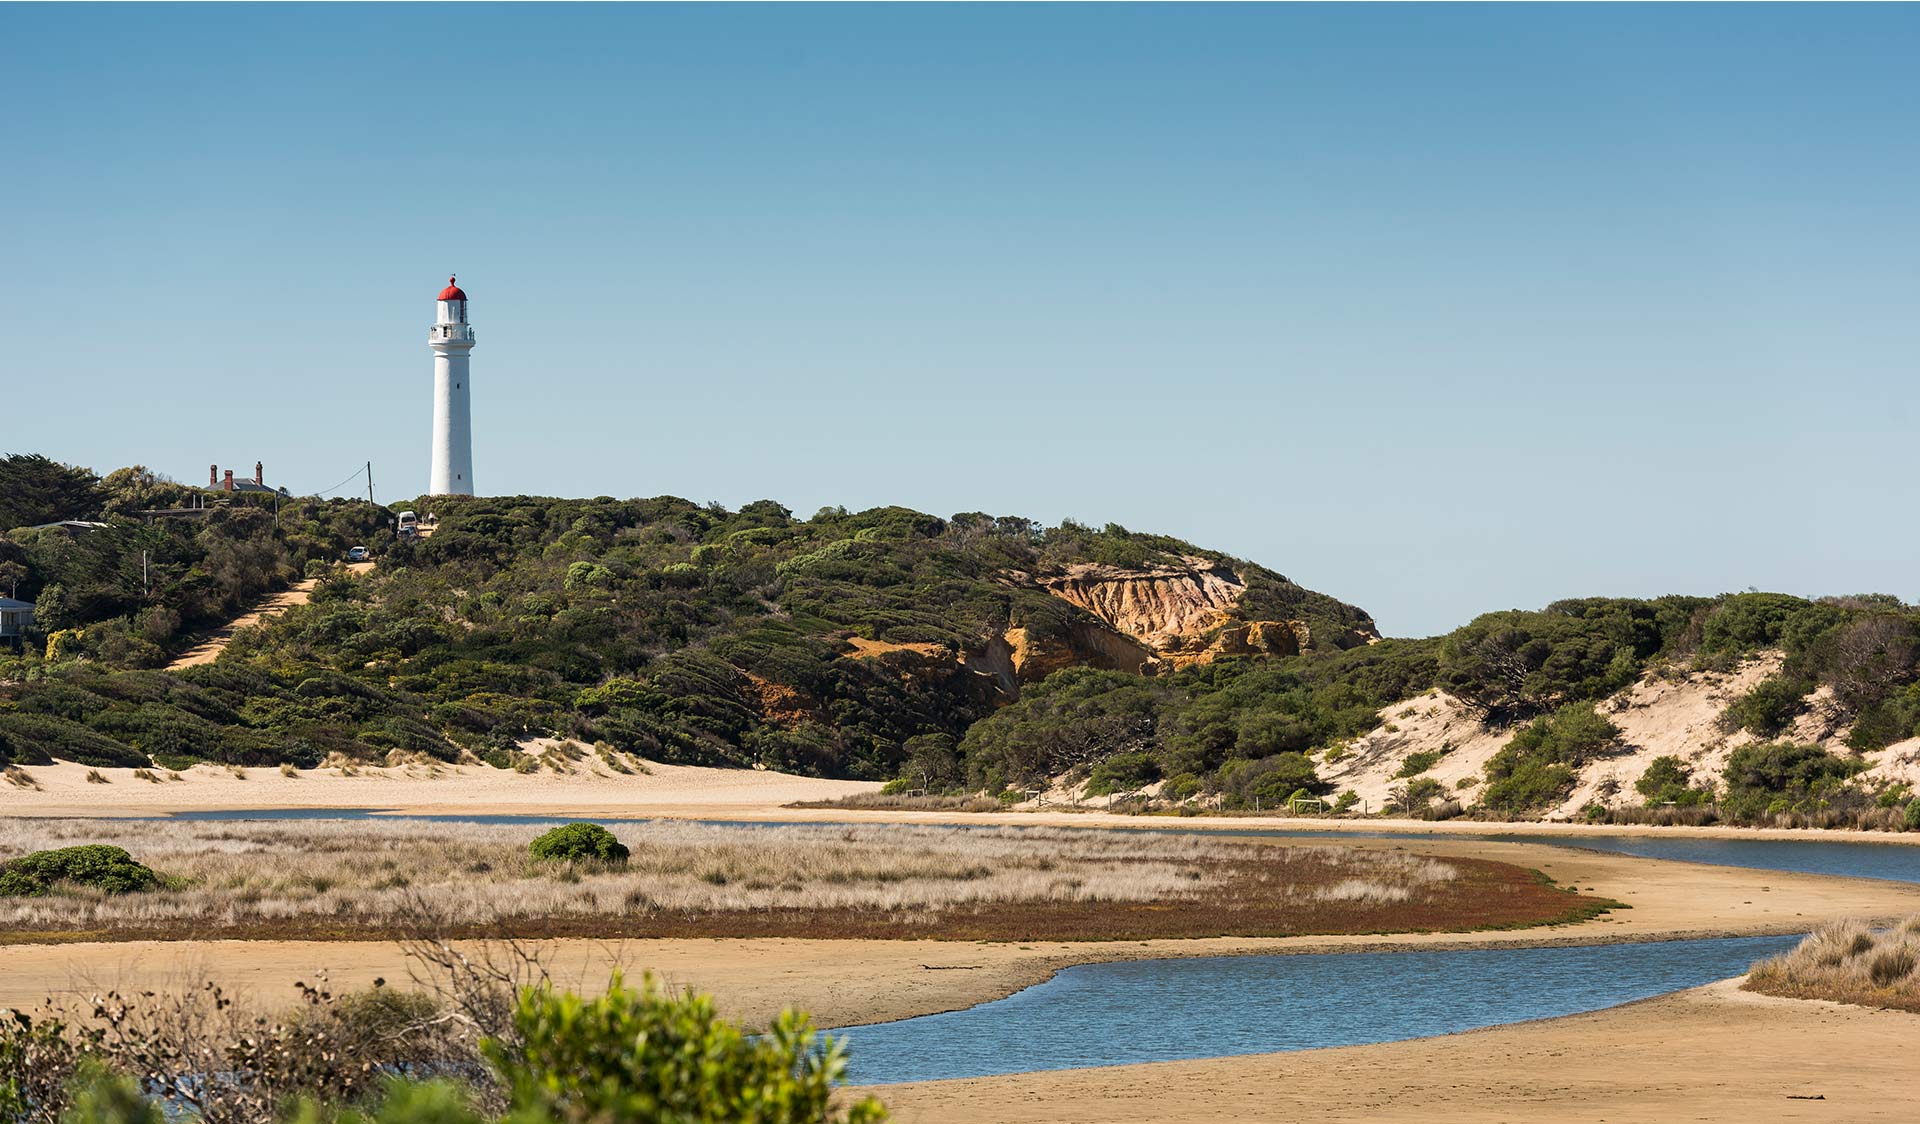 The famous Split Point Lighthouse at Airey's Inlet.